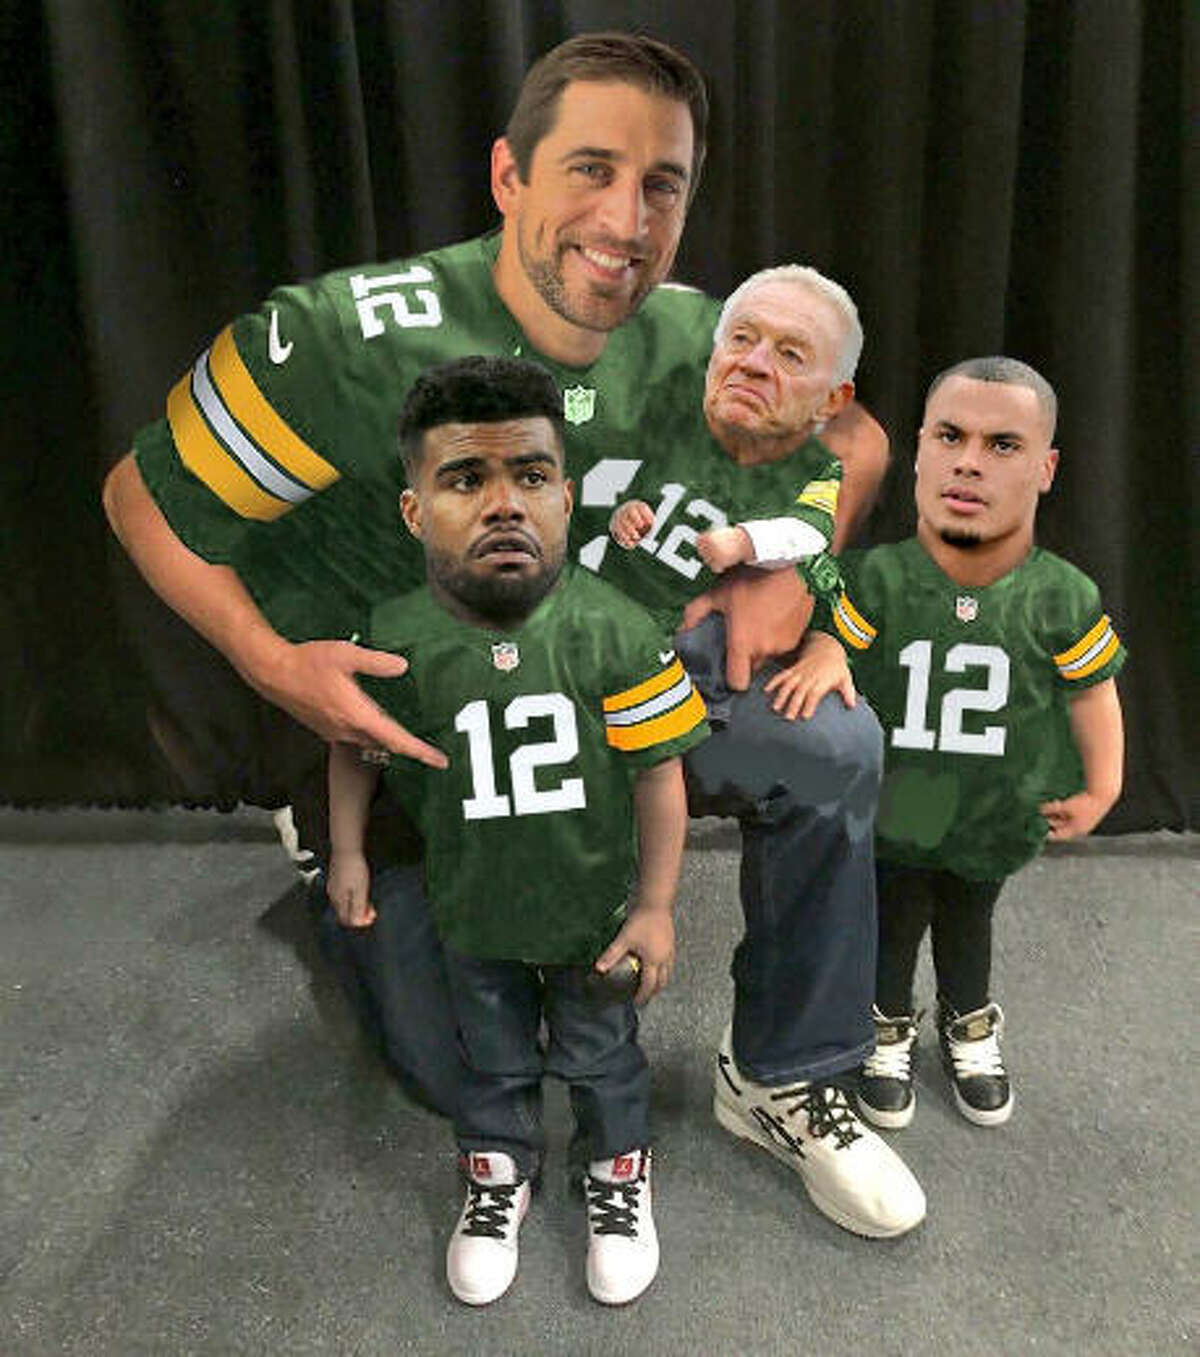 Source: Twitter Browse through photos for all the best memes from Week 5 in the NFL.